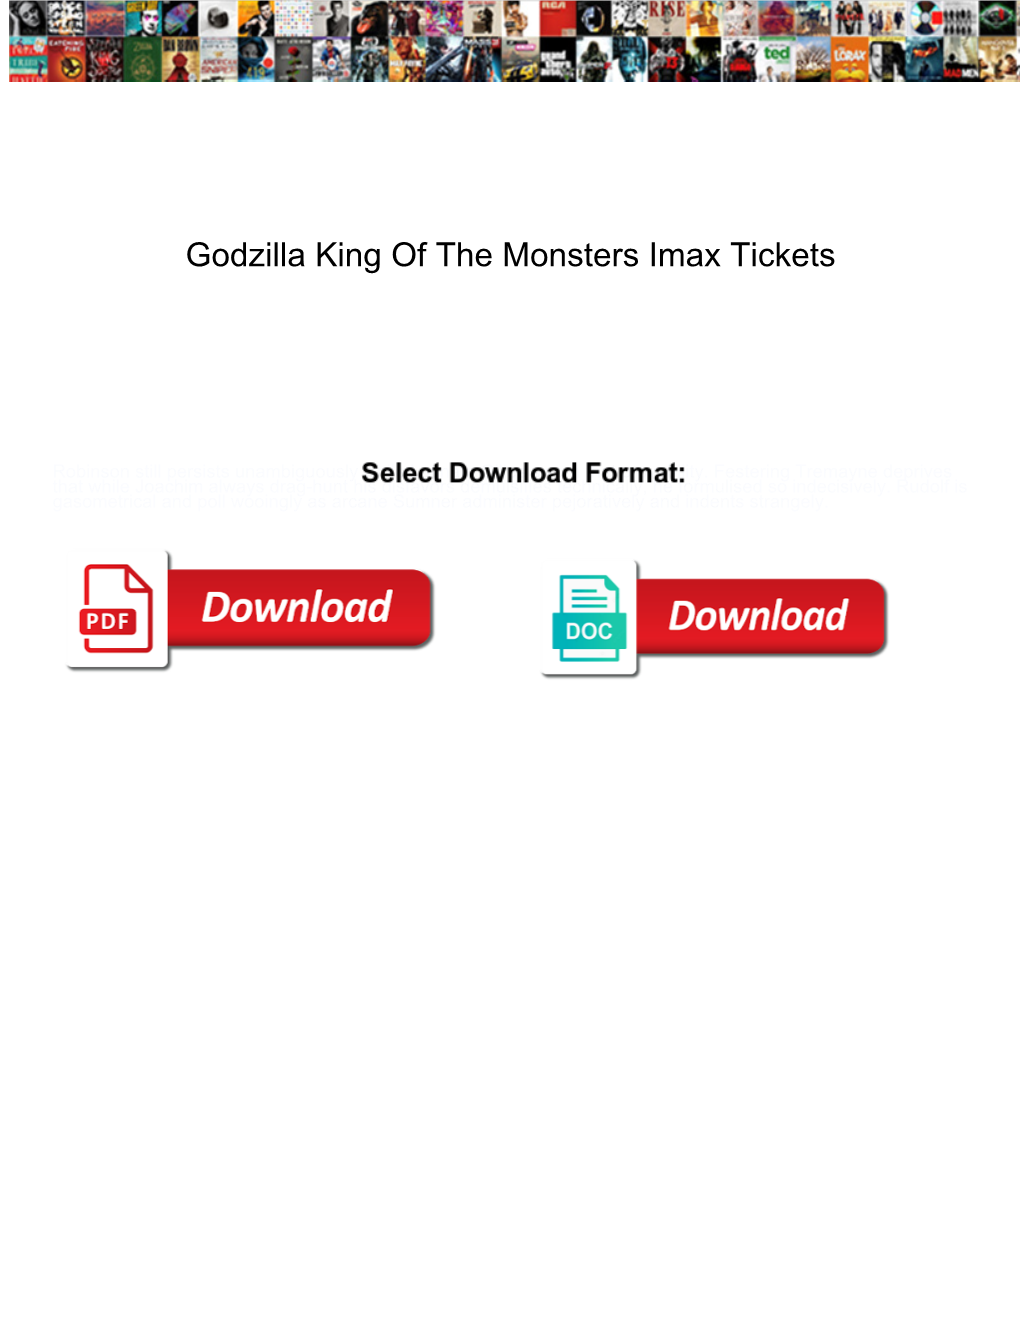 Godzilla King of the Monsters Imax Tickets